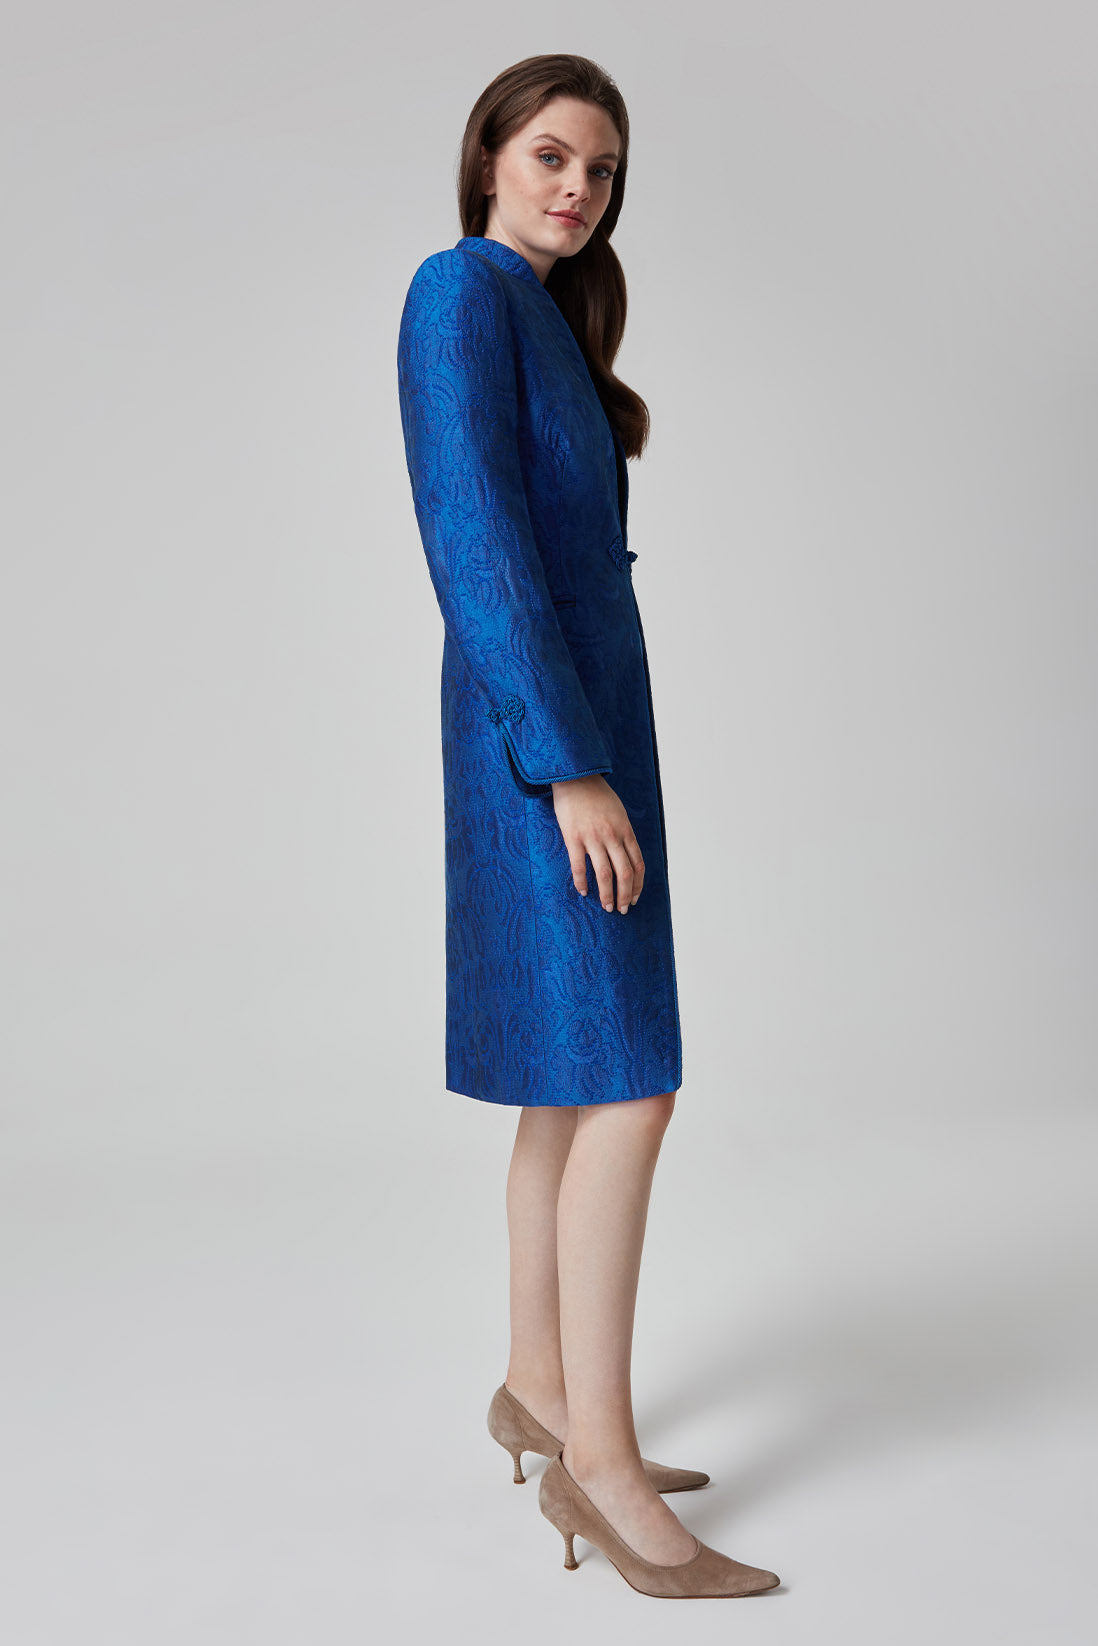 Royal Dress Coat in Winter Brocade with Cord Trim and Frogging  - Vicky